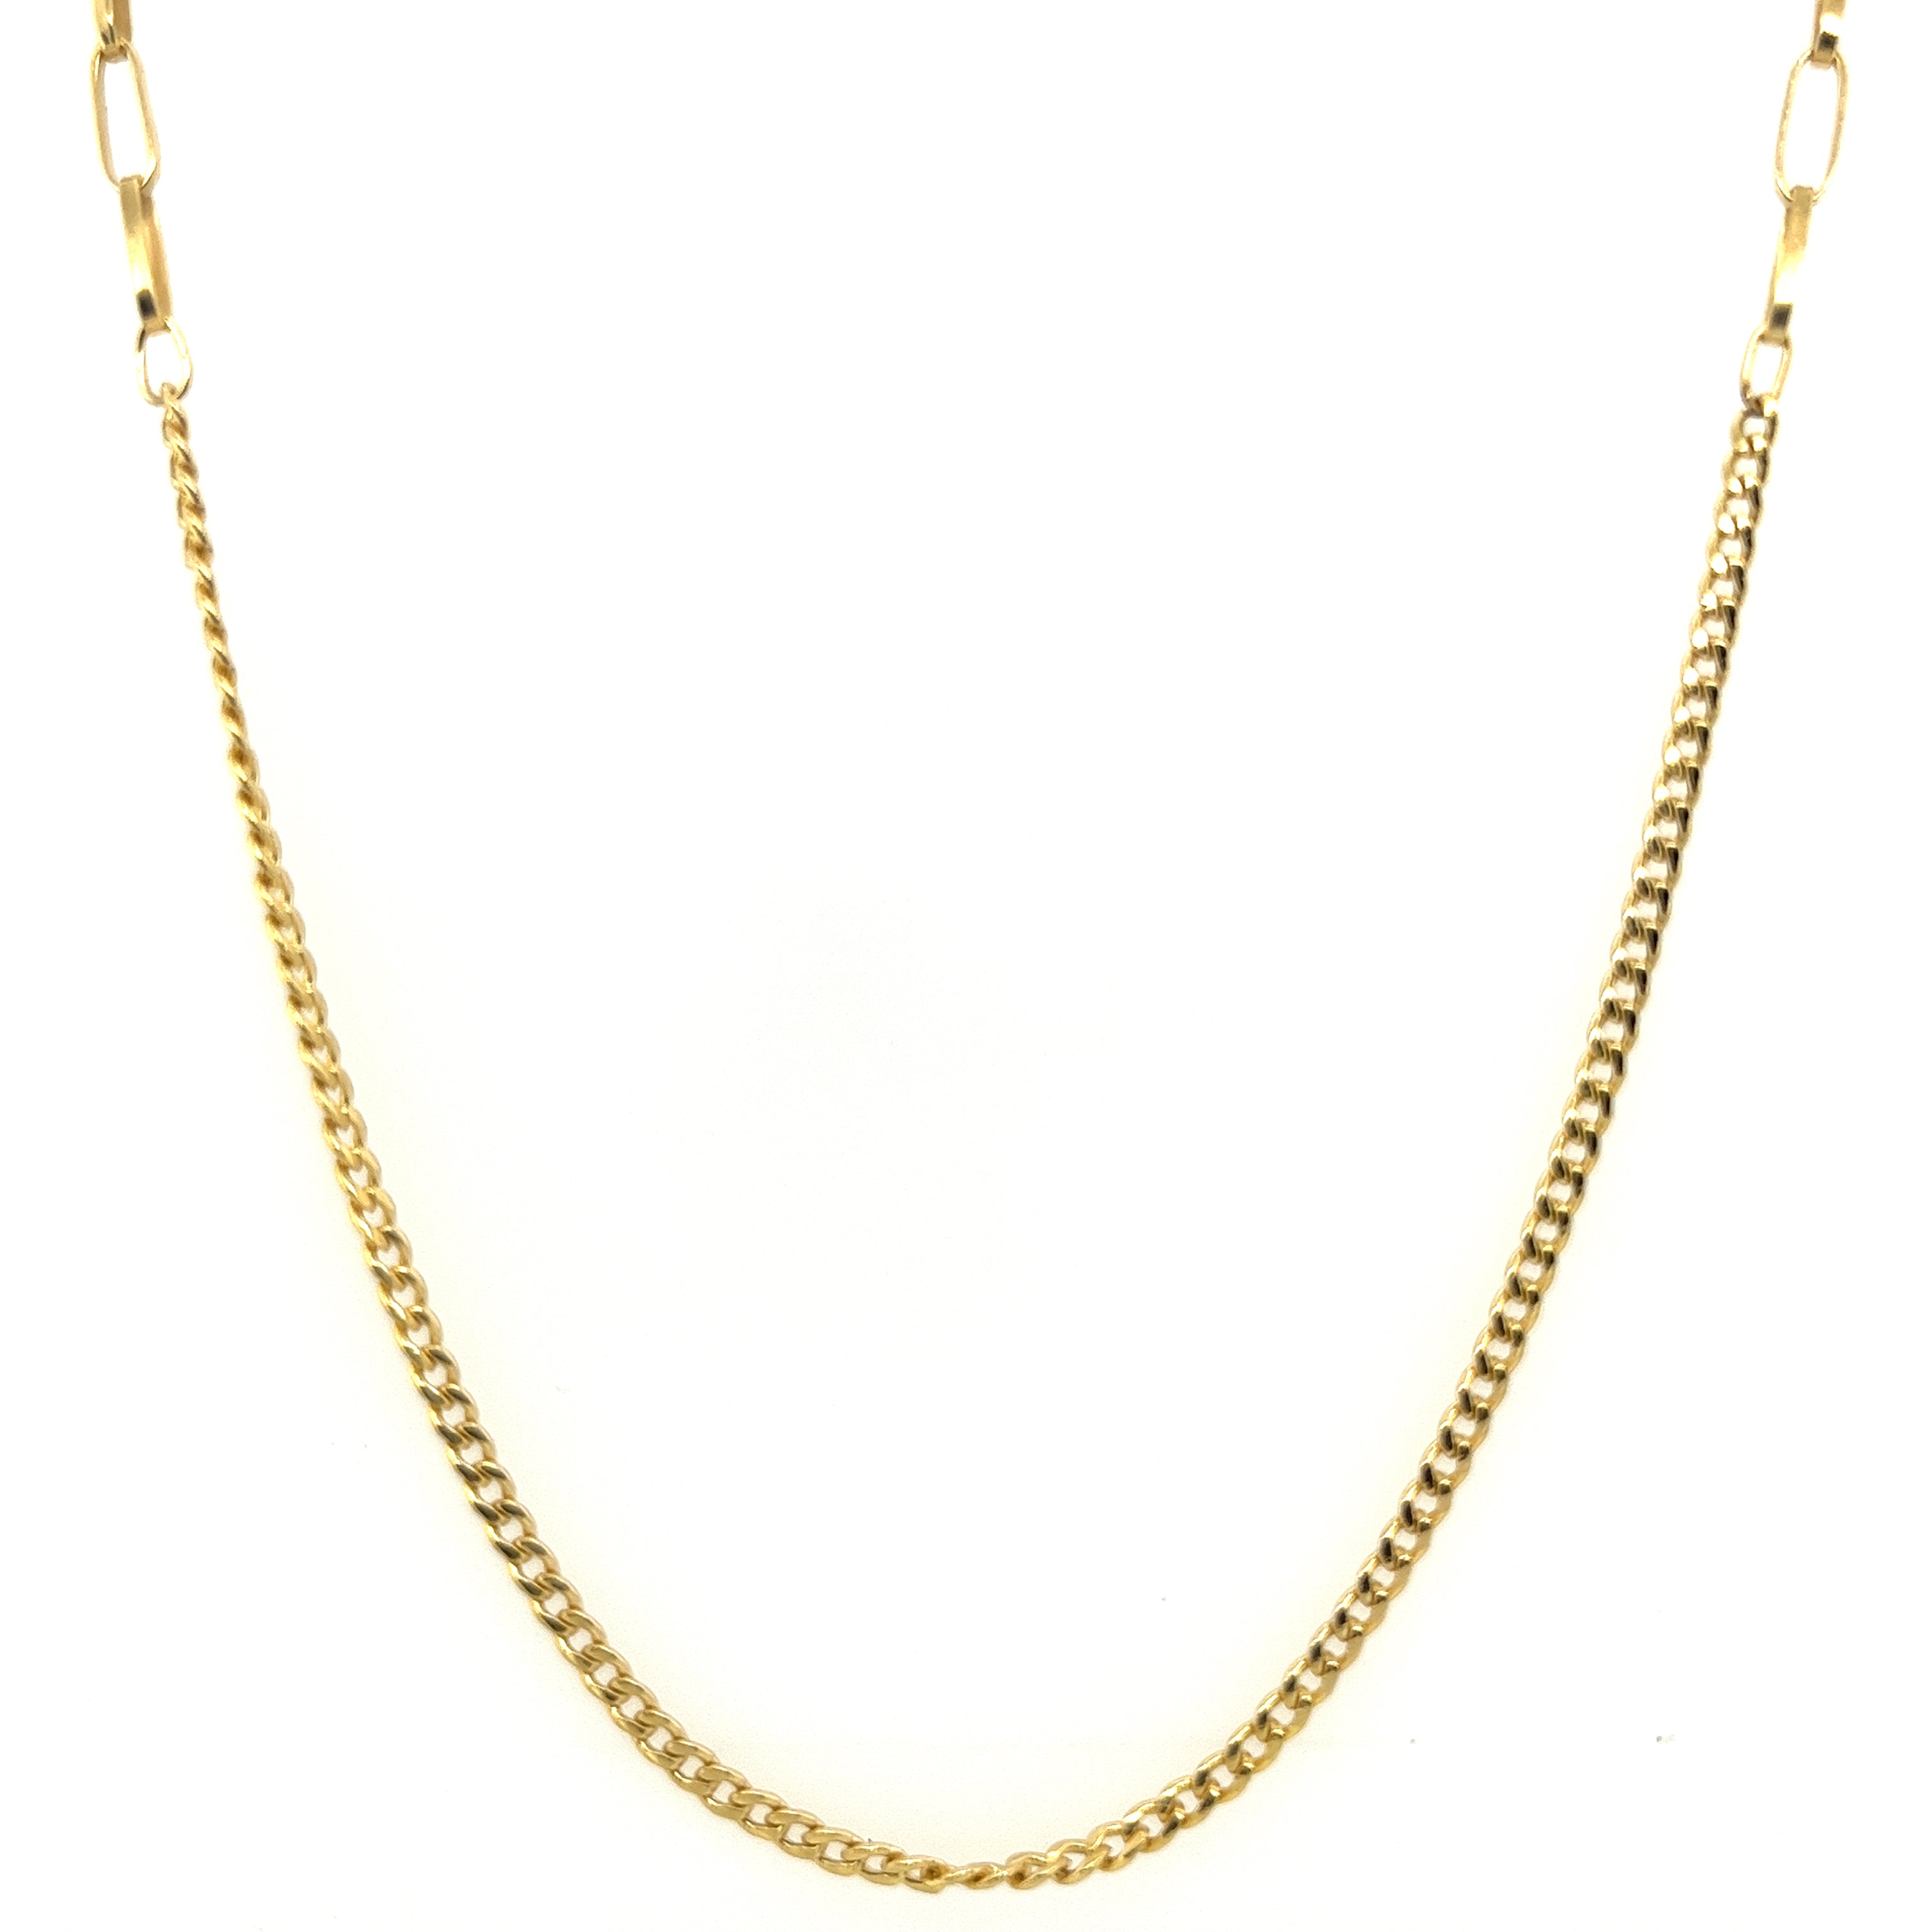 Beautiful linglong necklace with chains in the middle in 18K Yellow Gold / Mzft0388